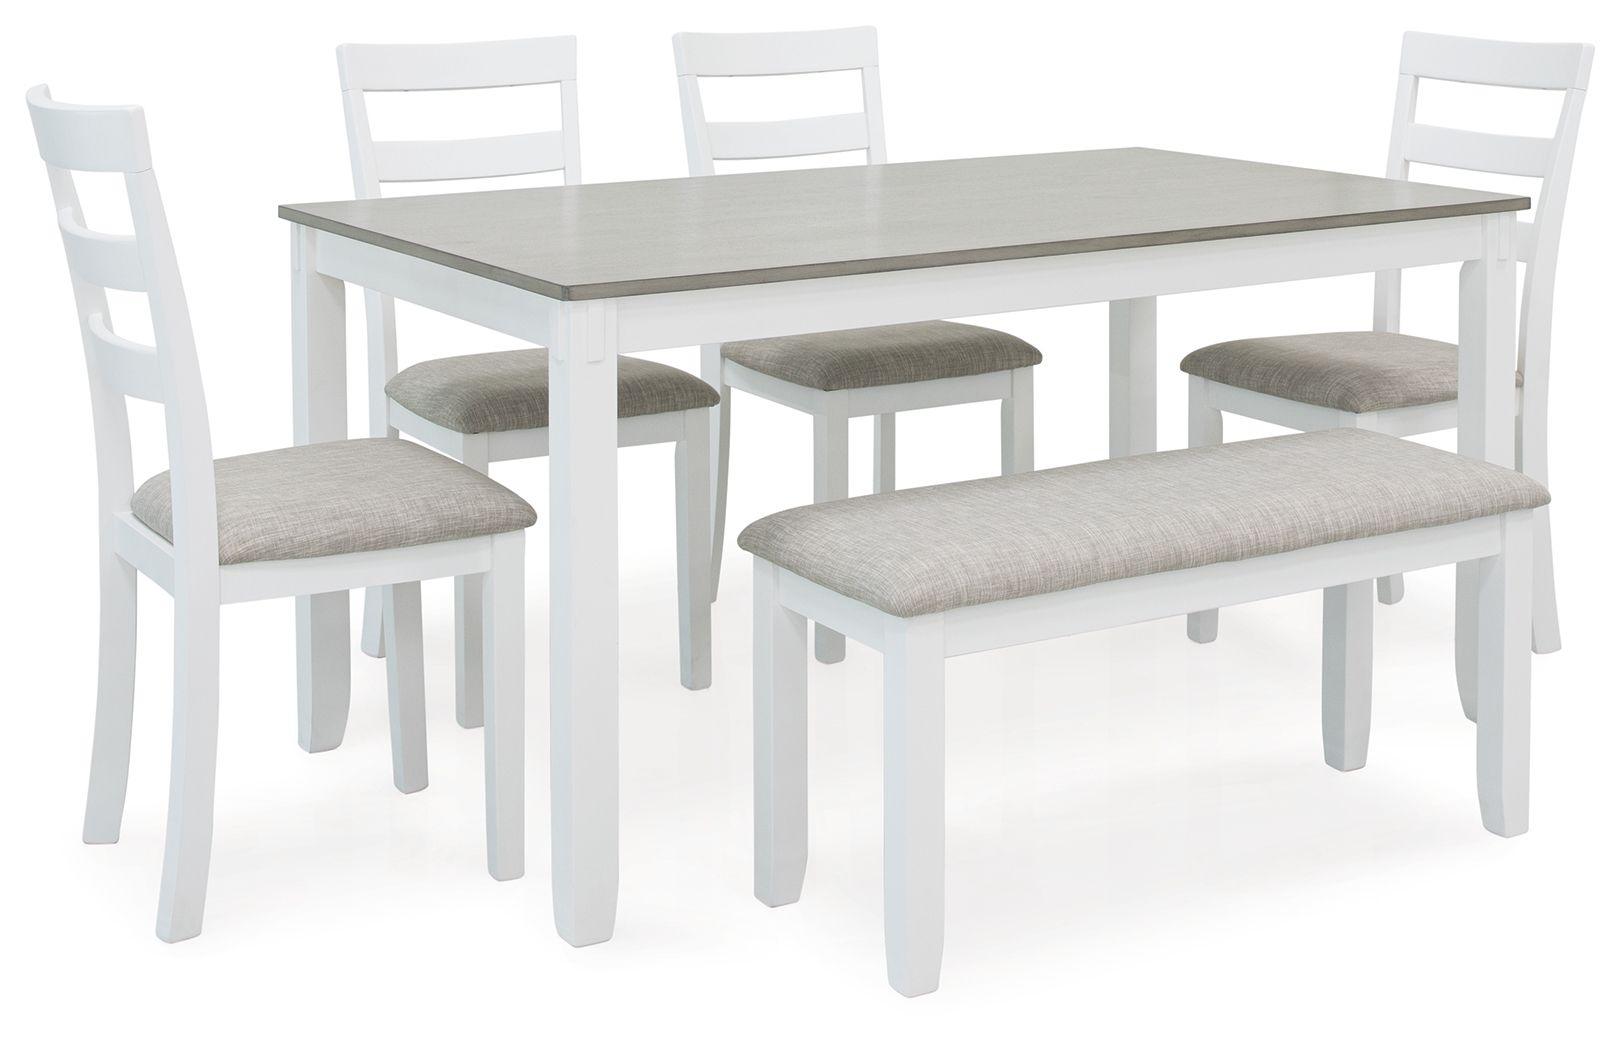 Signature Design by Ashley® - Stonehollow - White / Gray - Rectangular Drm Table Set (Set of 6) - 5th Avenue Furniture